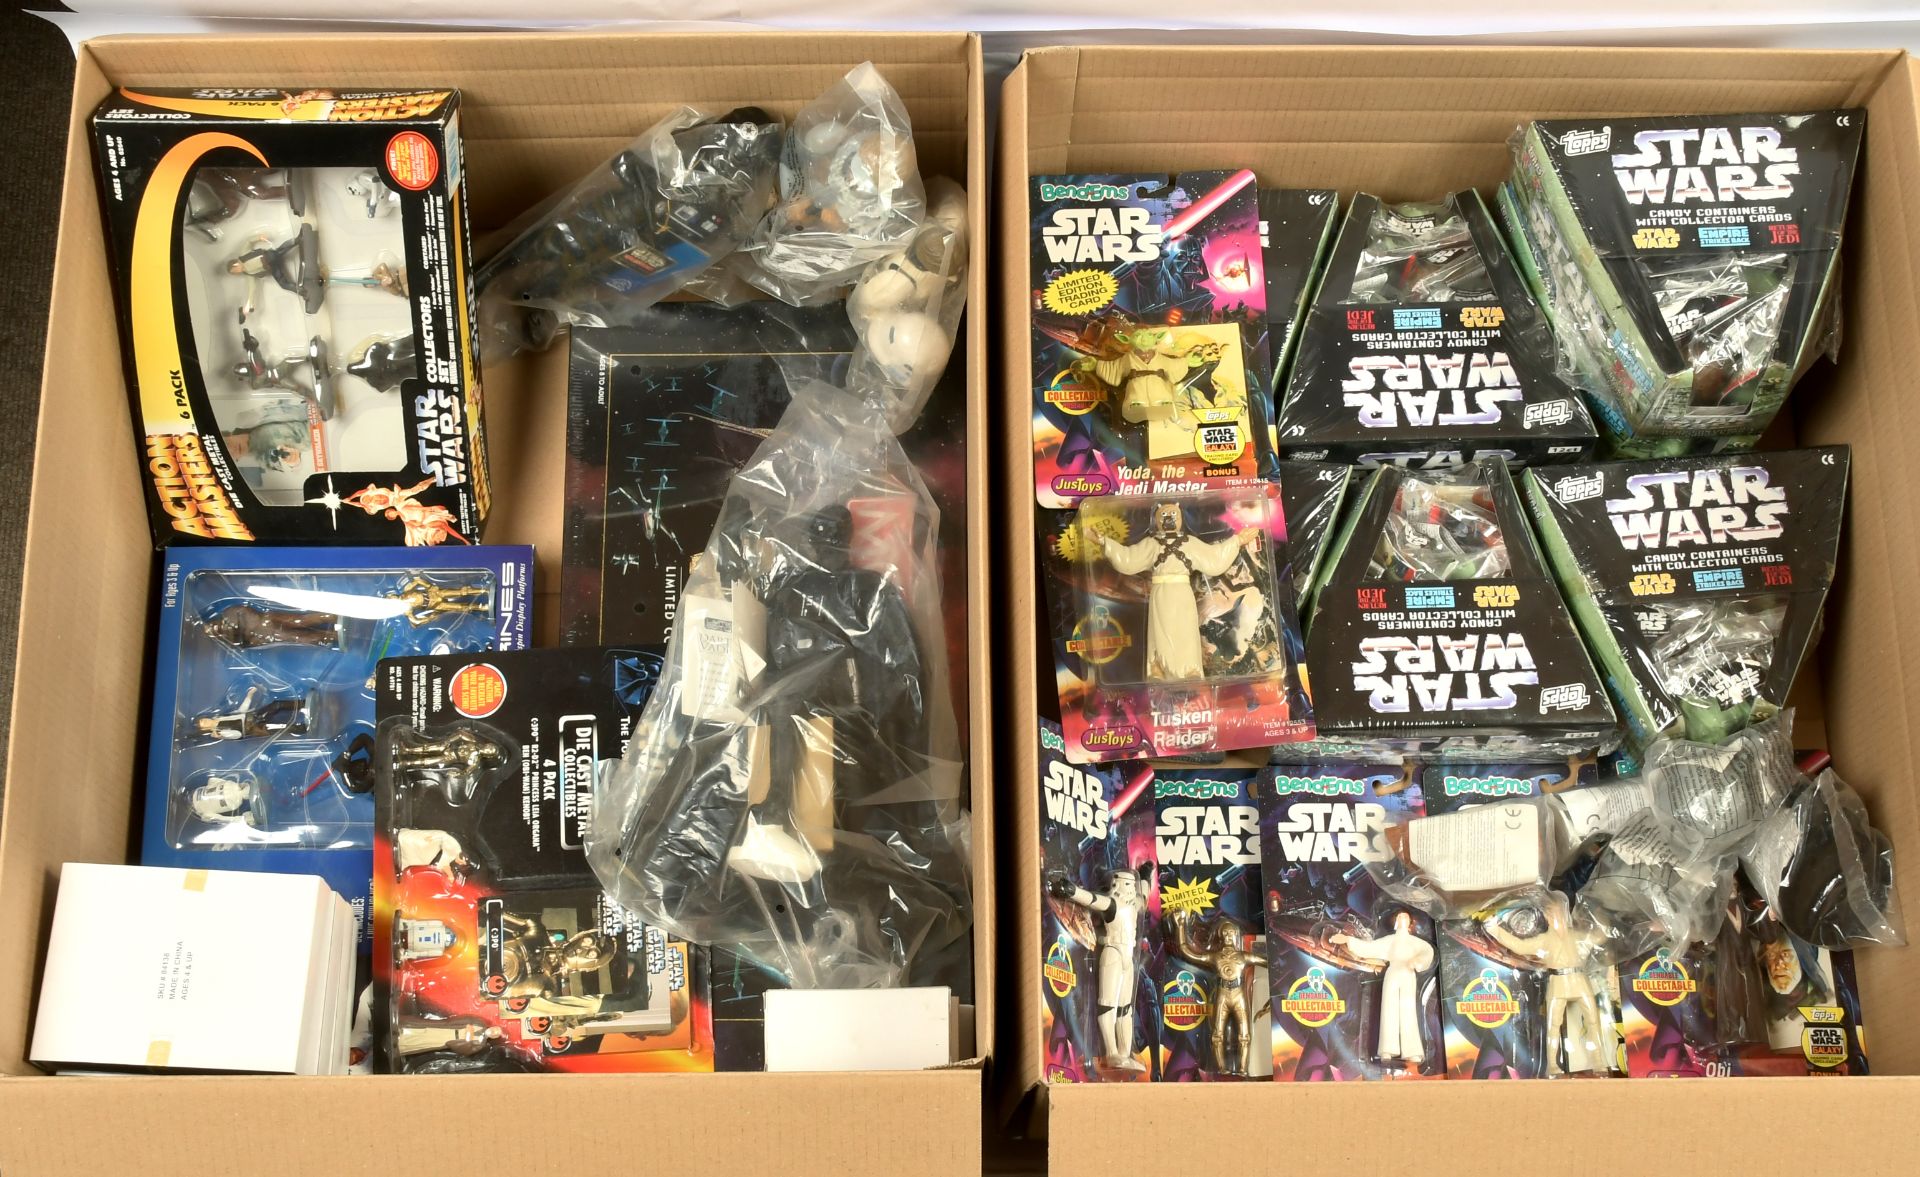 Star Wars collection of toys and ephemera